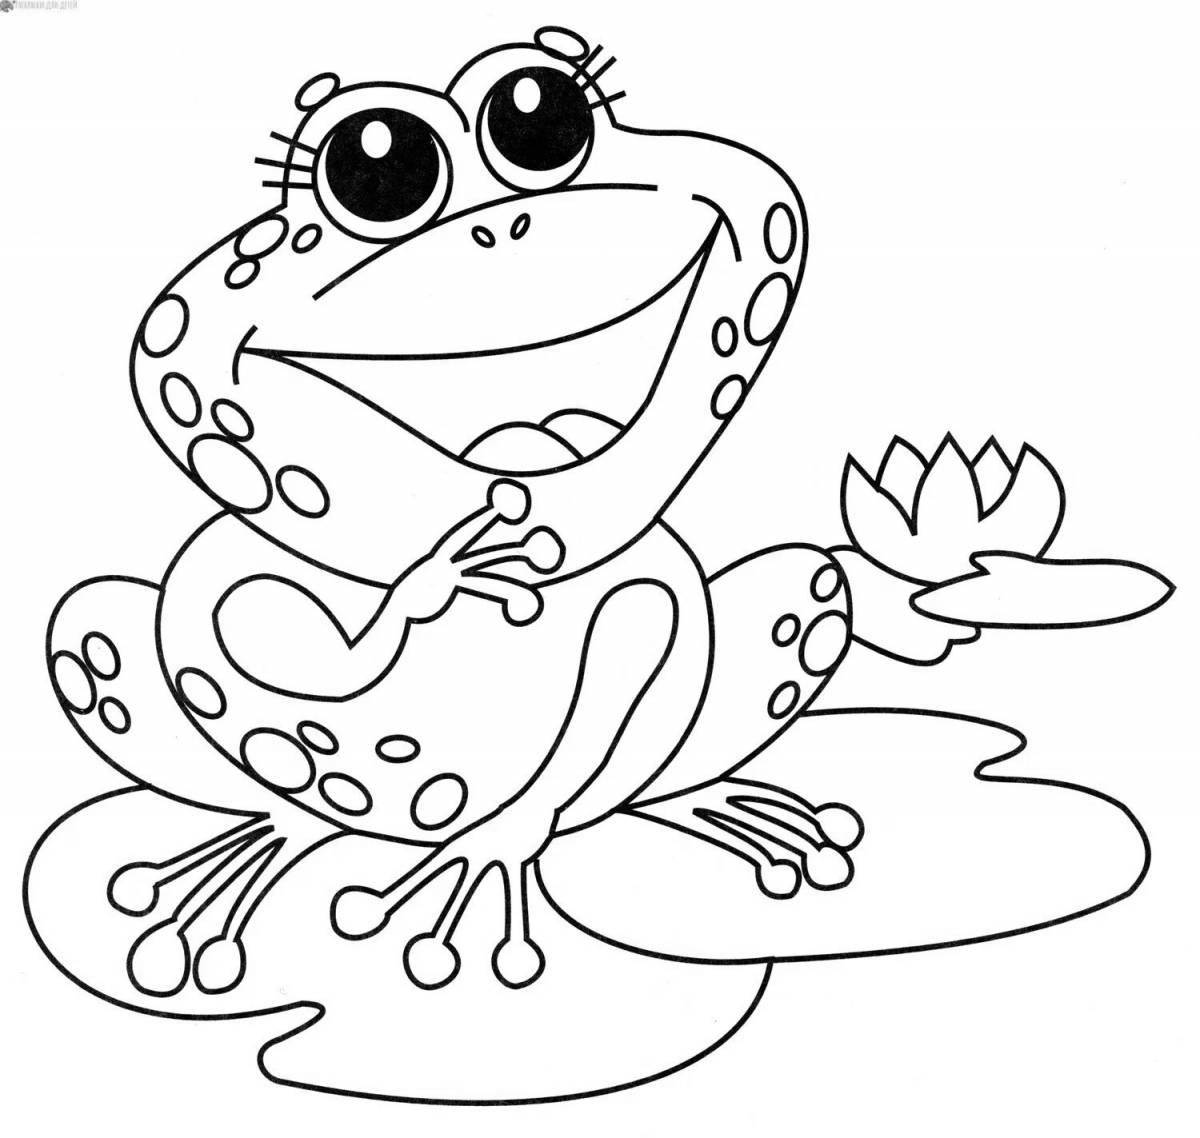 Lovely frog drawing for kids